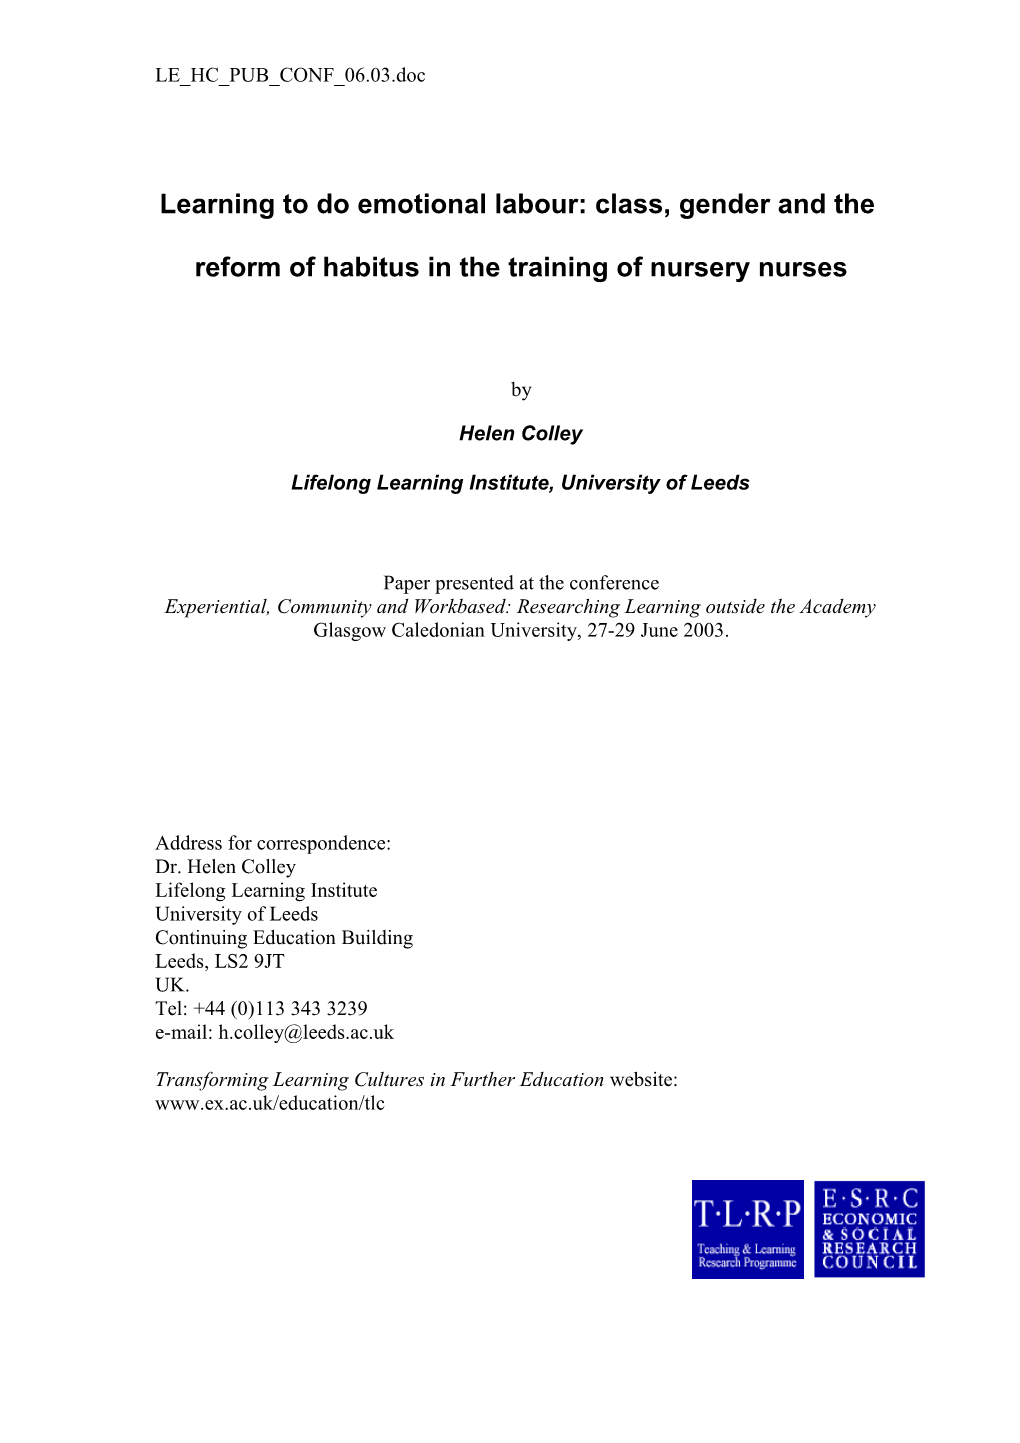 Learning To Do Emotional Labour: Class, Gender And The Reform Of Habitus In The Training Of Nursery Nurses